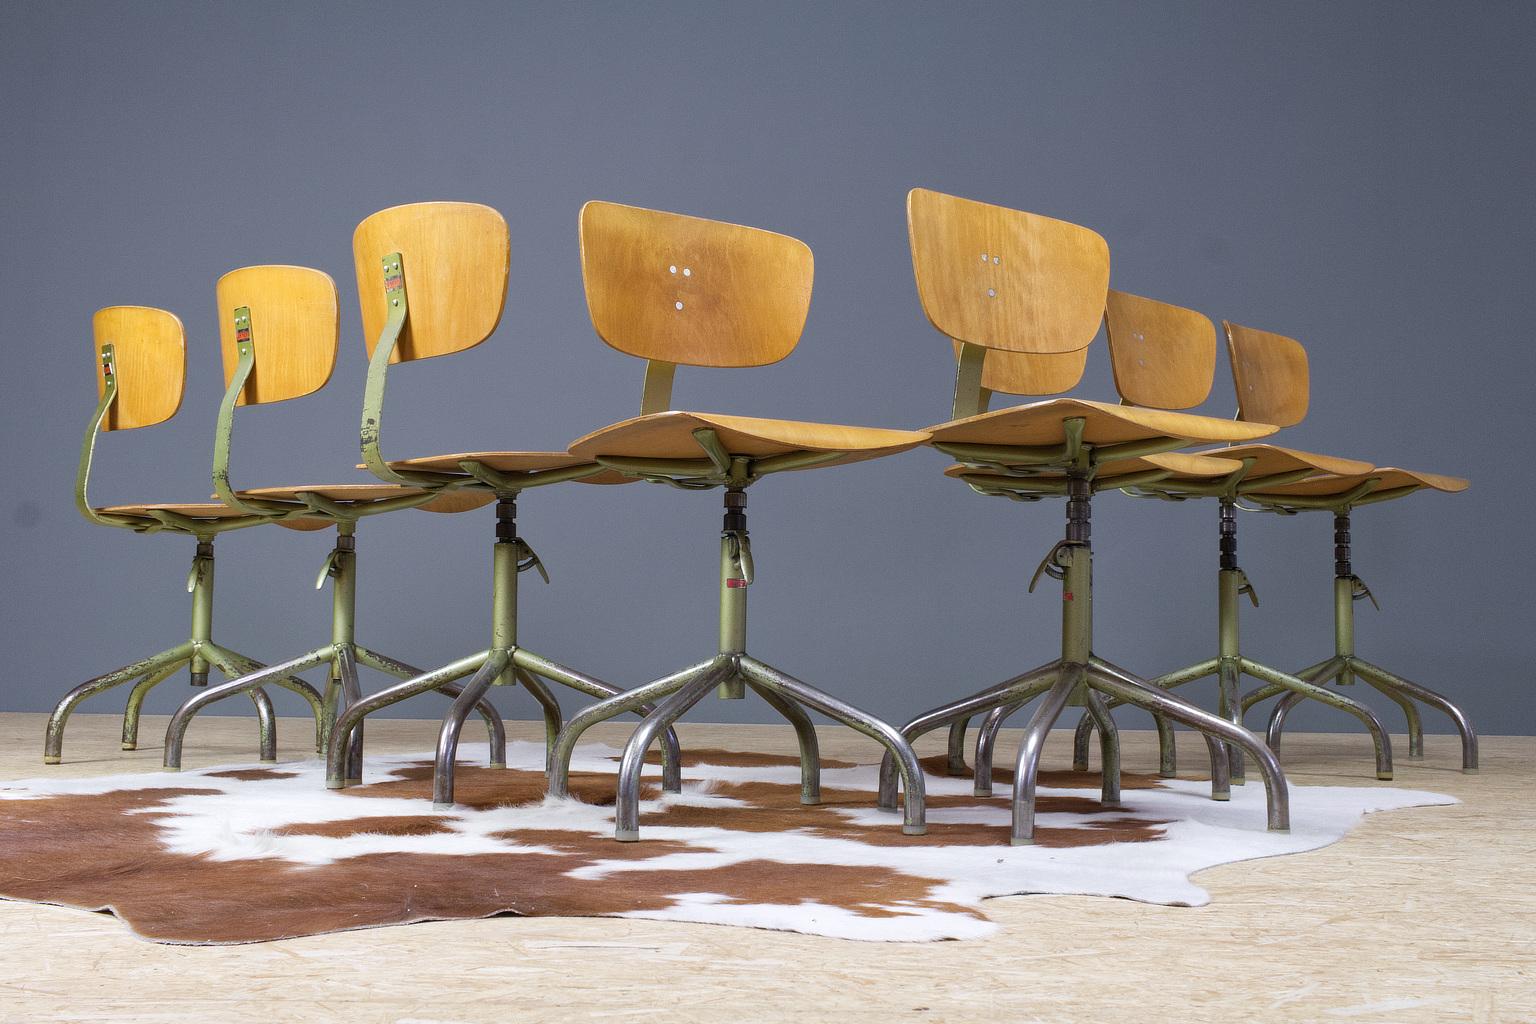 A set of 8 desk swivel chairs in metal an plywood, labelled 'Walter', Germany 1960s. The height is adjustable with an easy lever. Nice patina through use on the metal frames and legs as shown on photos. The green metal frame and plywood are in very